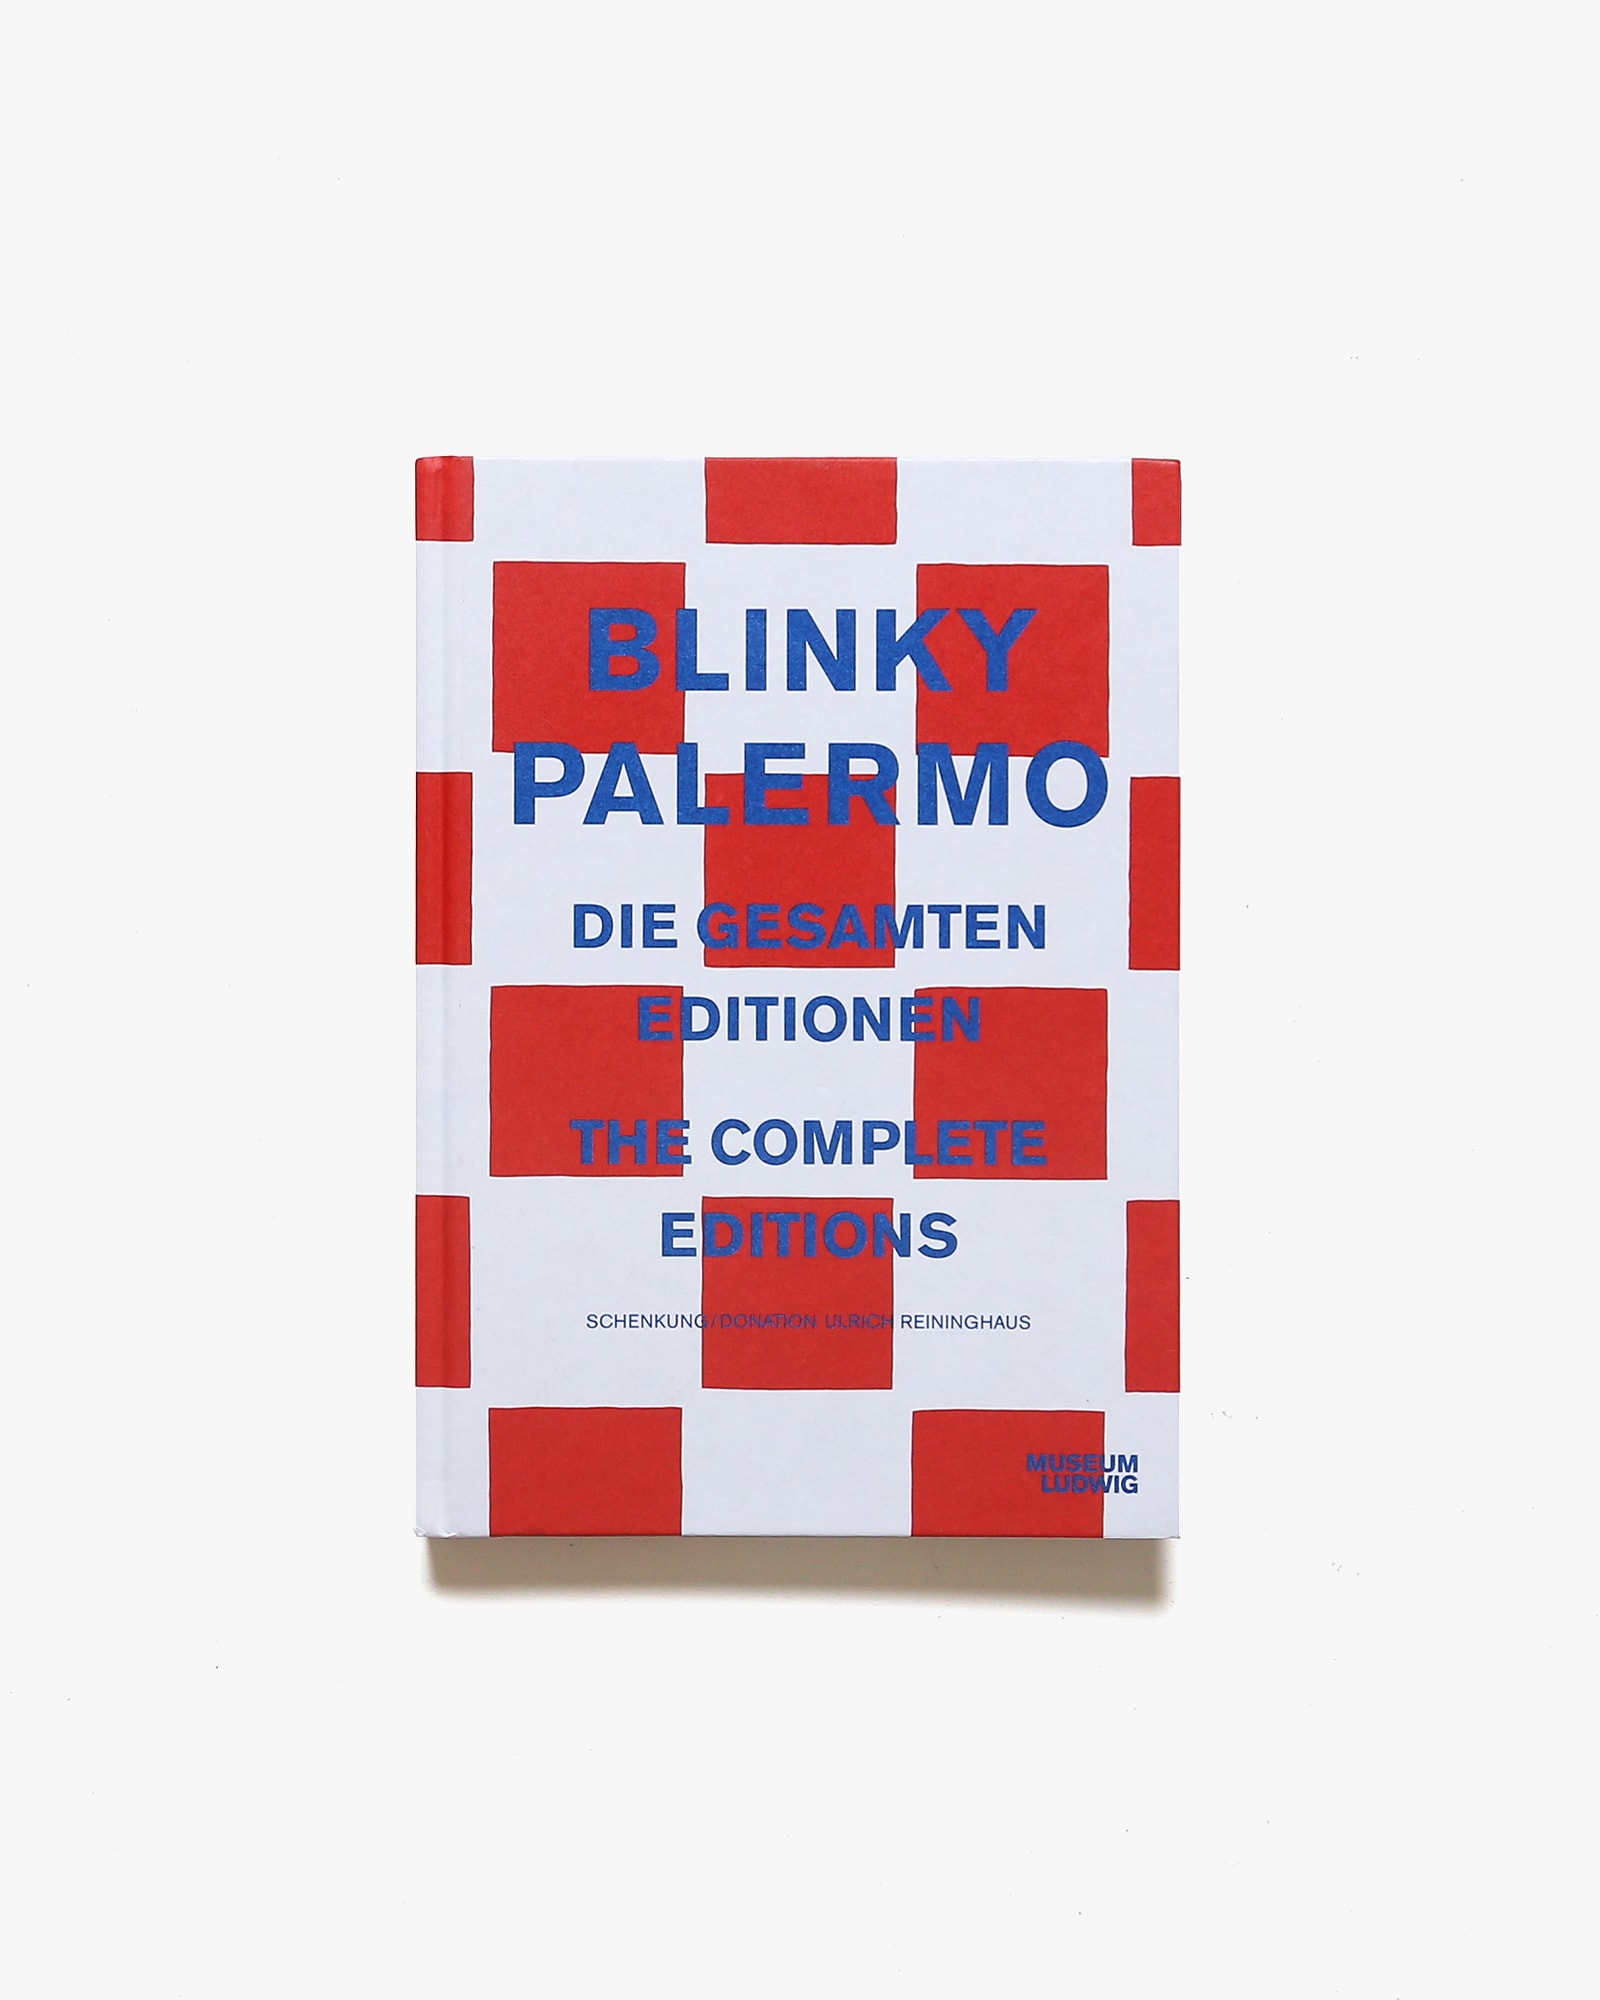 Blinky Palermo: The Complete Editions